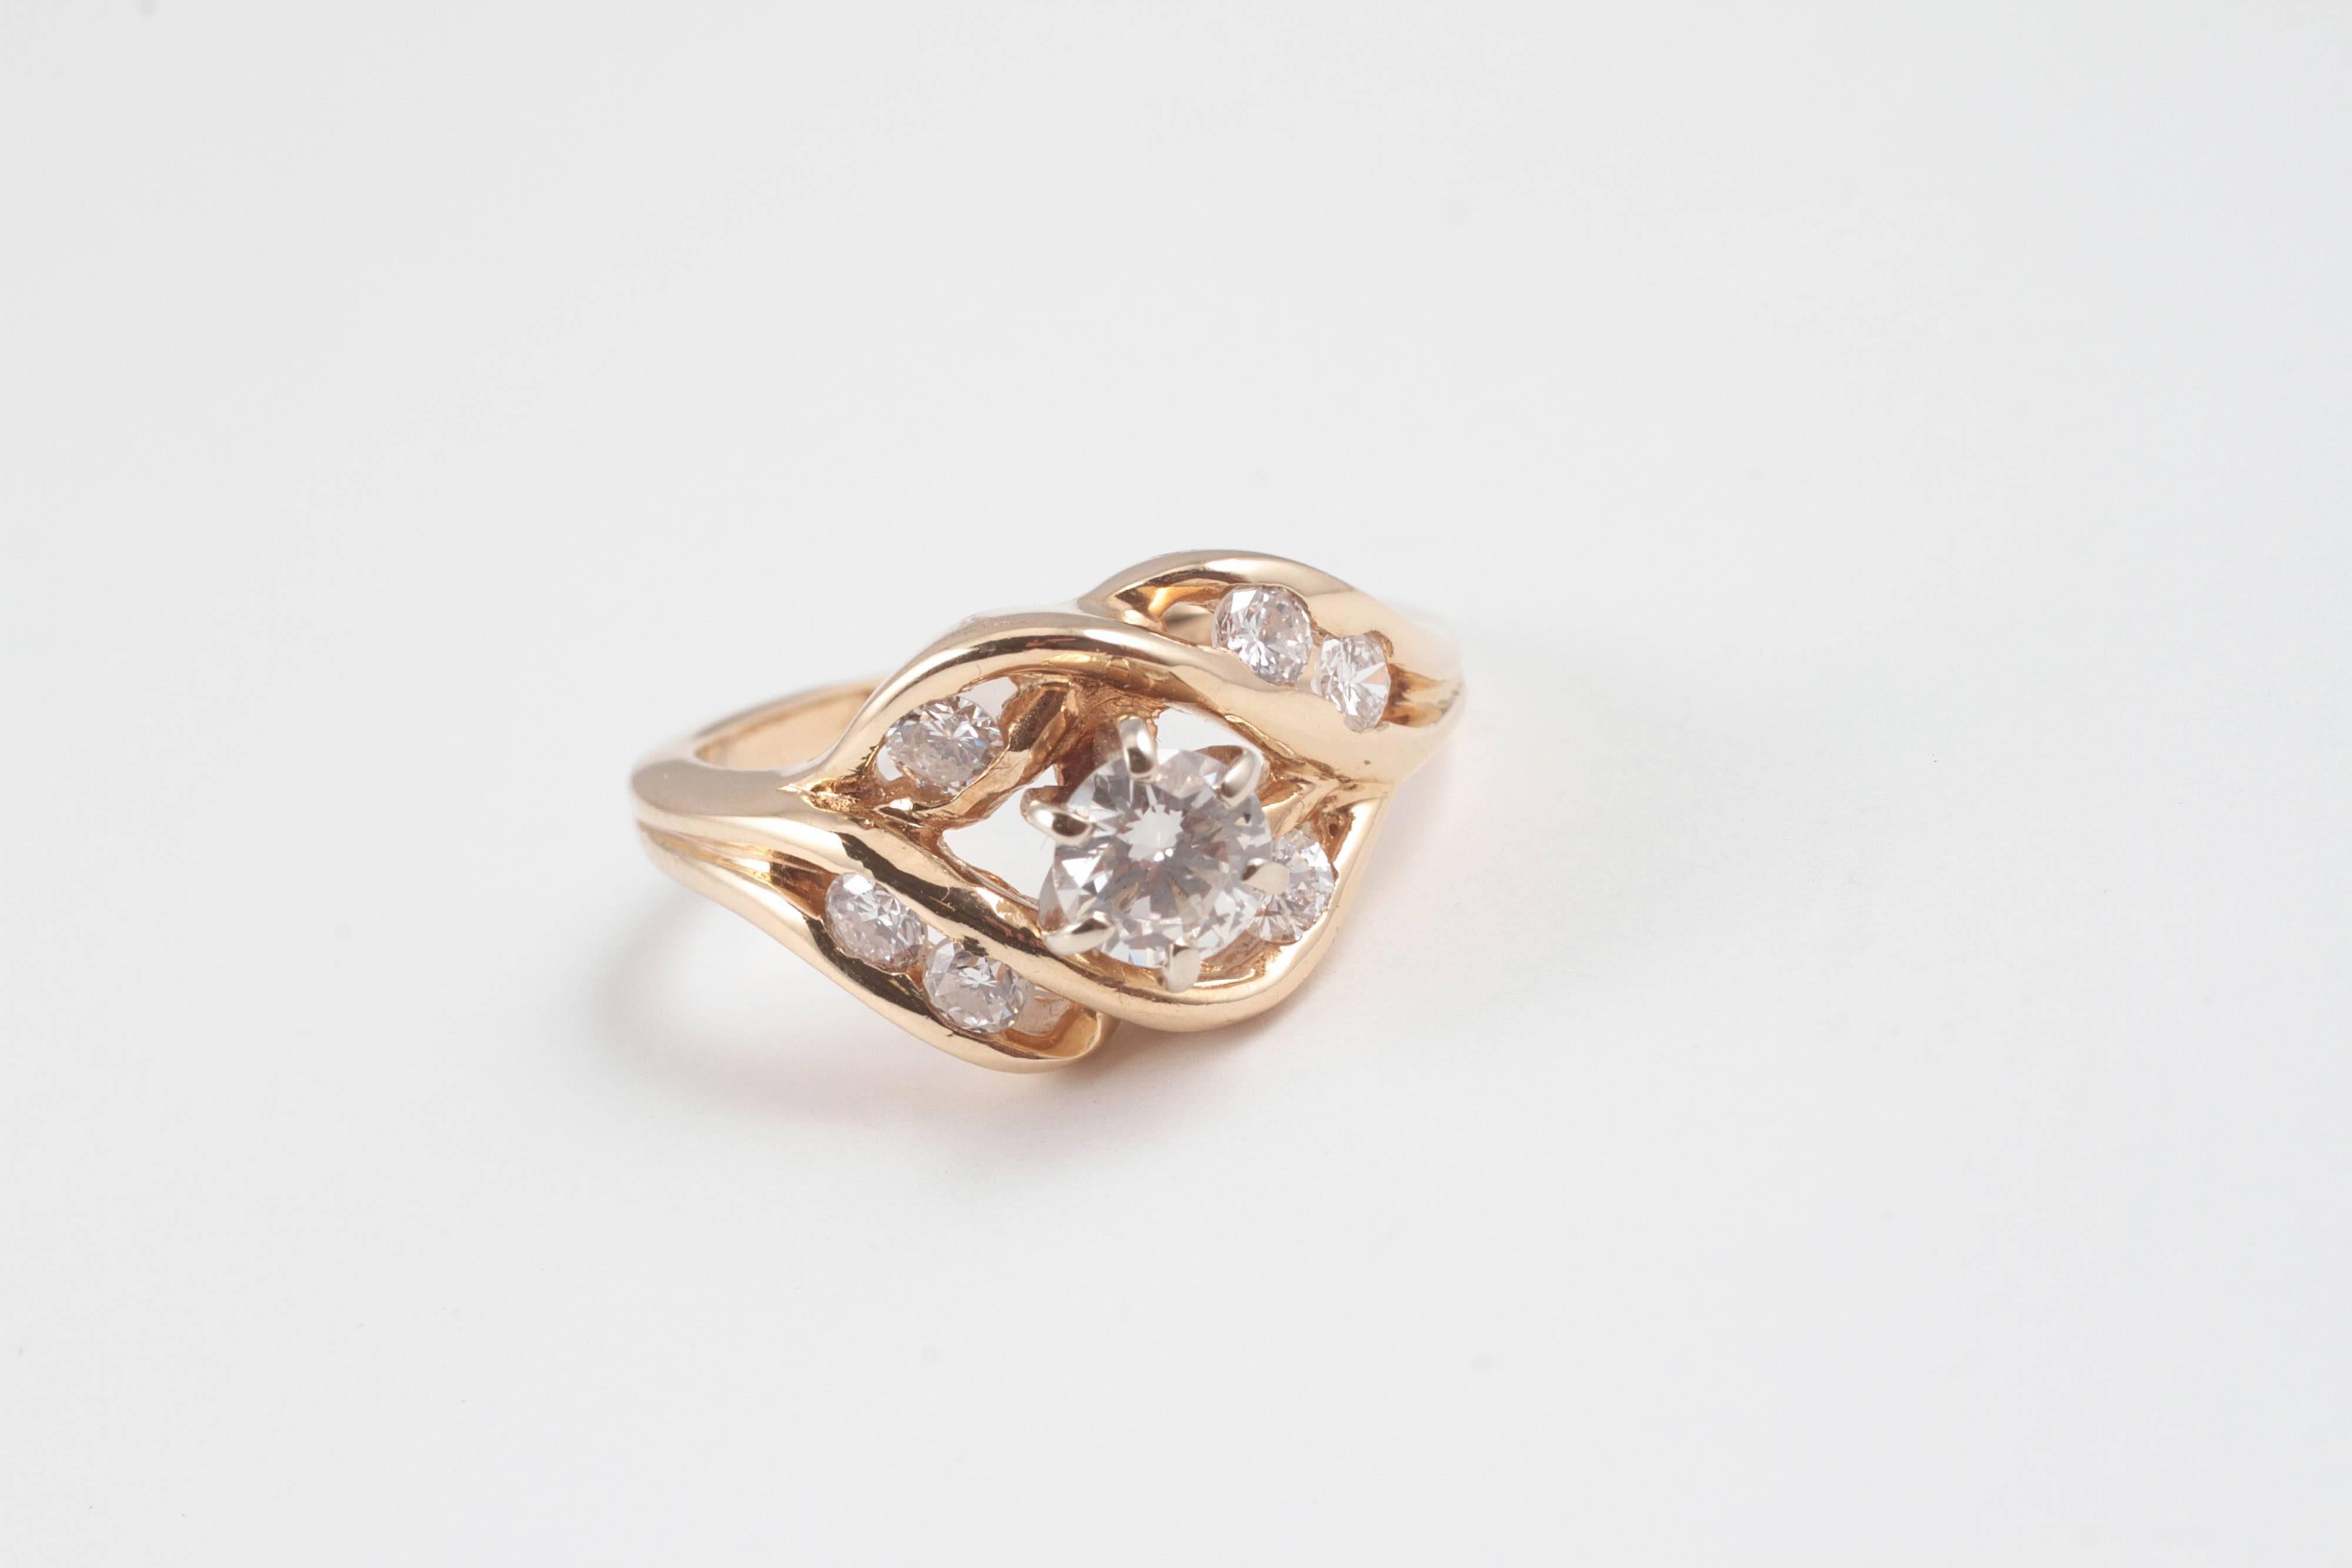 Free-form, 1.00 carat diamond ring in 14 karat yellow gold. A great look! Size 5 3/4.